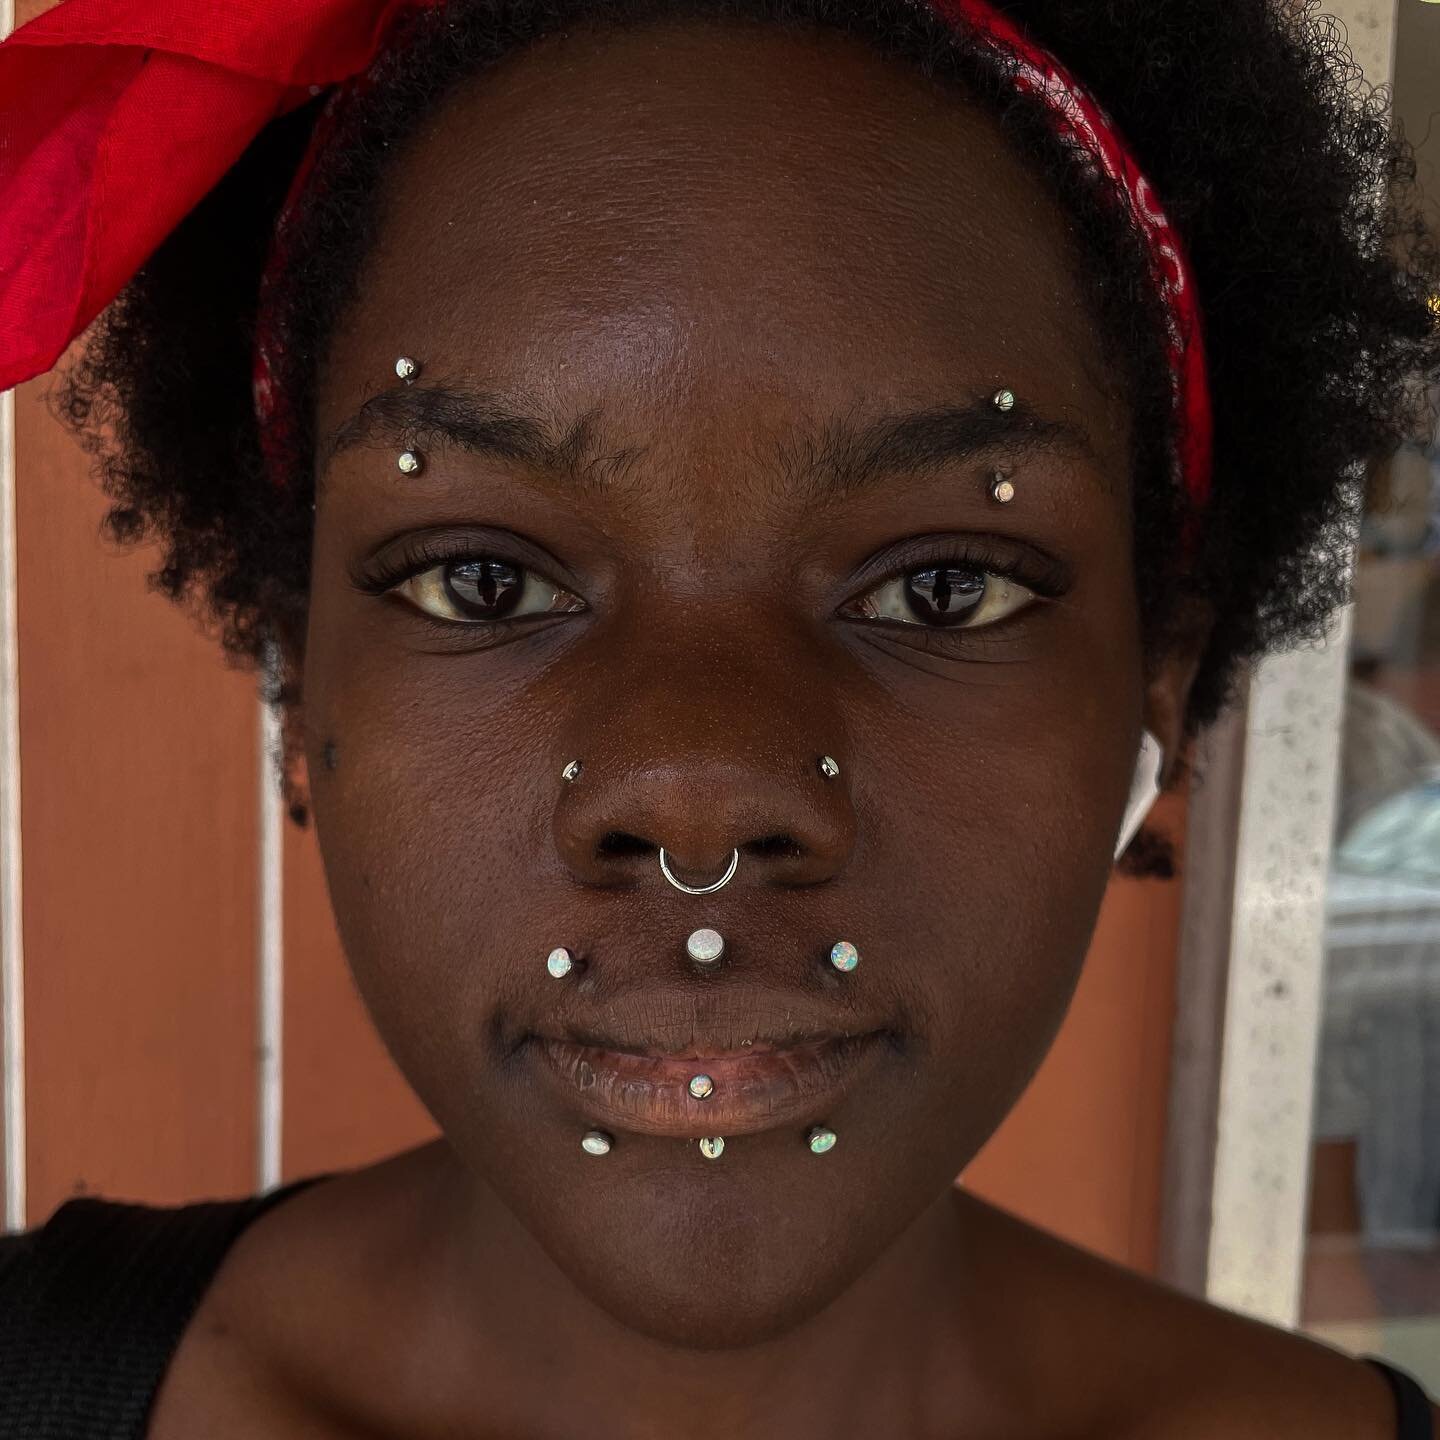 Our counter-person @ghoulishcammy is finally symmetrical again! With a fresh eyebrow and upper lip done the other day(left side). They&rsquo;re rockin all f-136 titanium White Opal from @neometaljewelry in just about everything now!